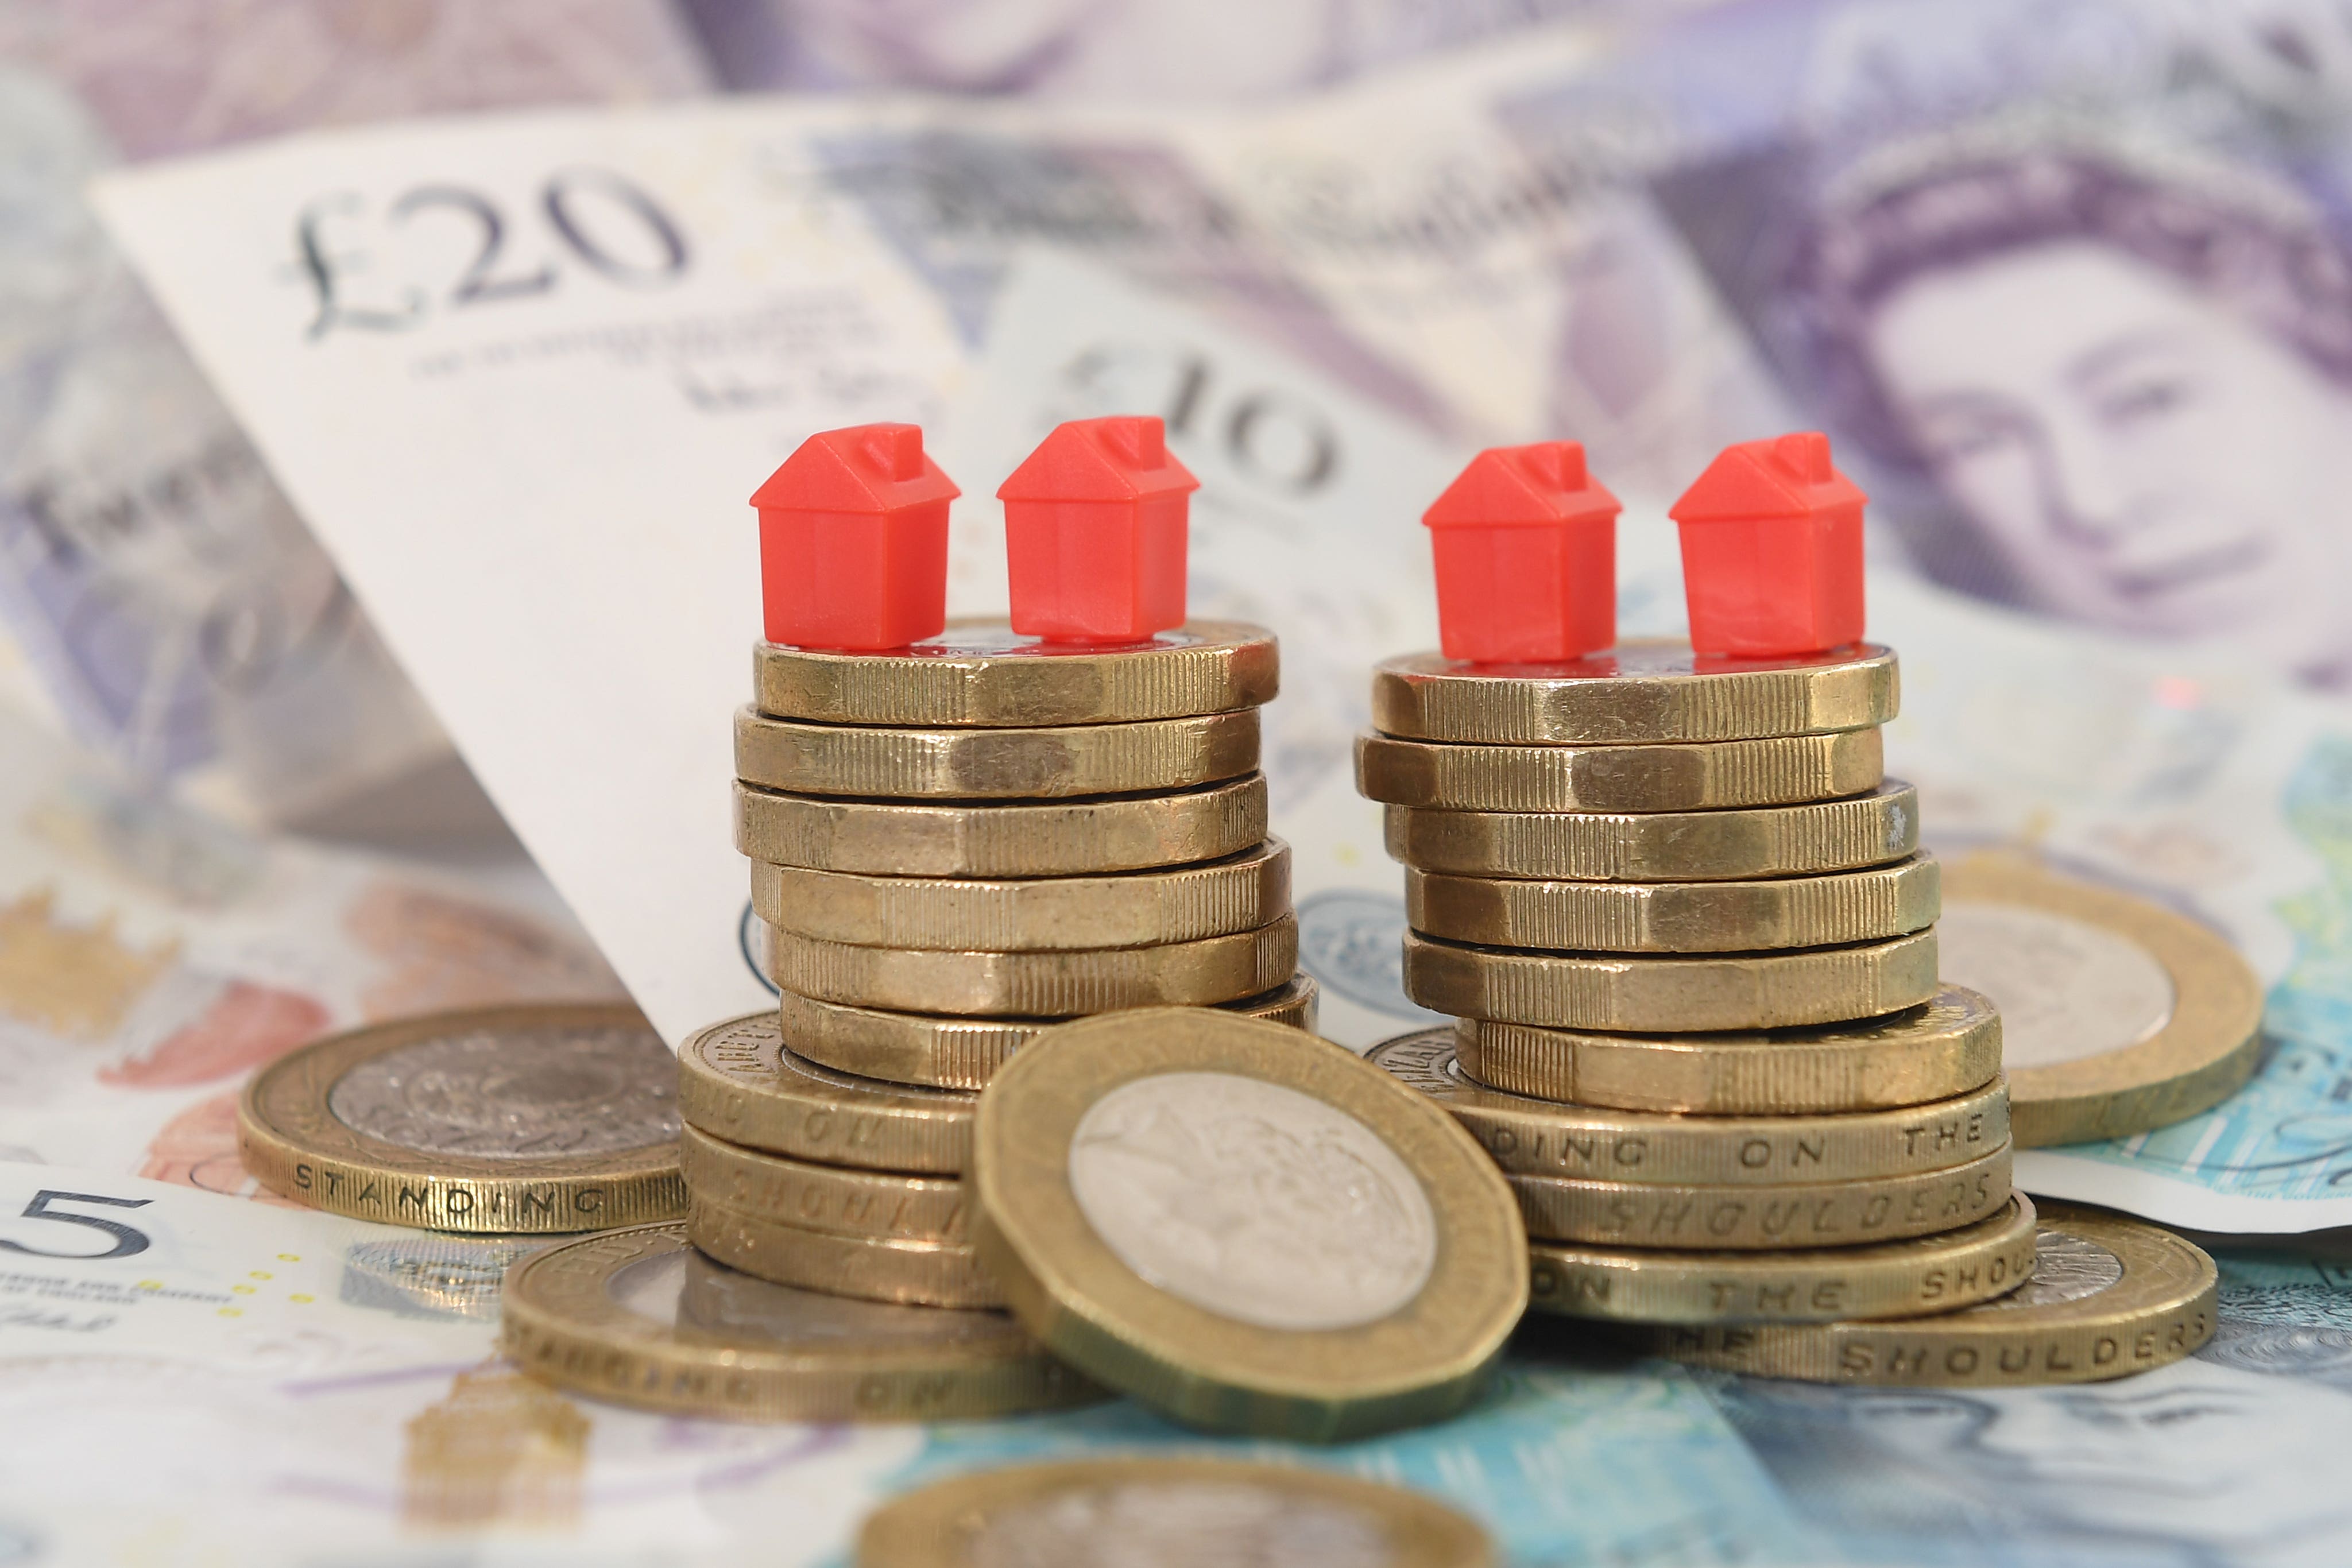 New rights and protections for leaseholders have been proposed by the Financial Conduct Authority, to improve the transparency of the multi-occupancy leasehold buildings insurance market (Joe Giddens/PA)